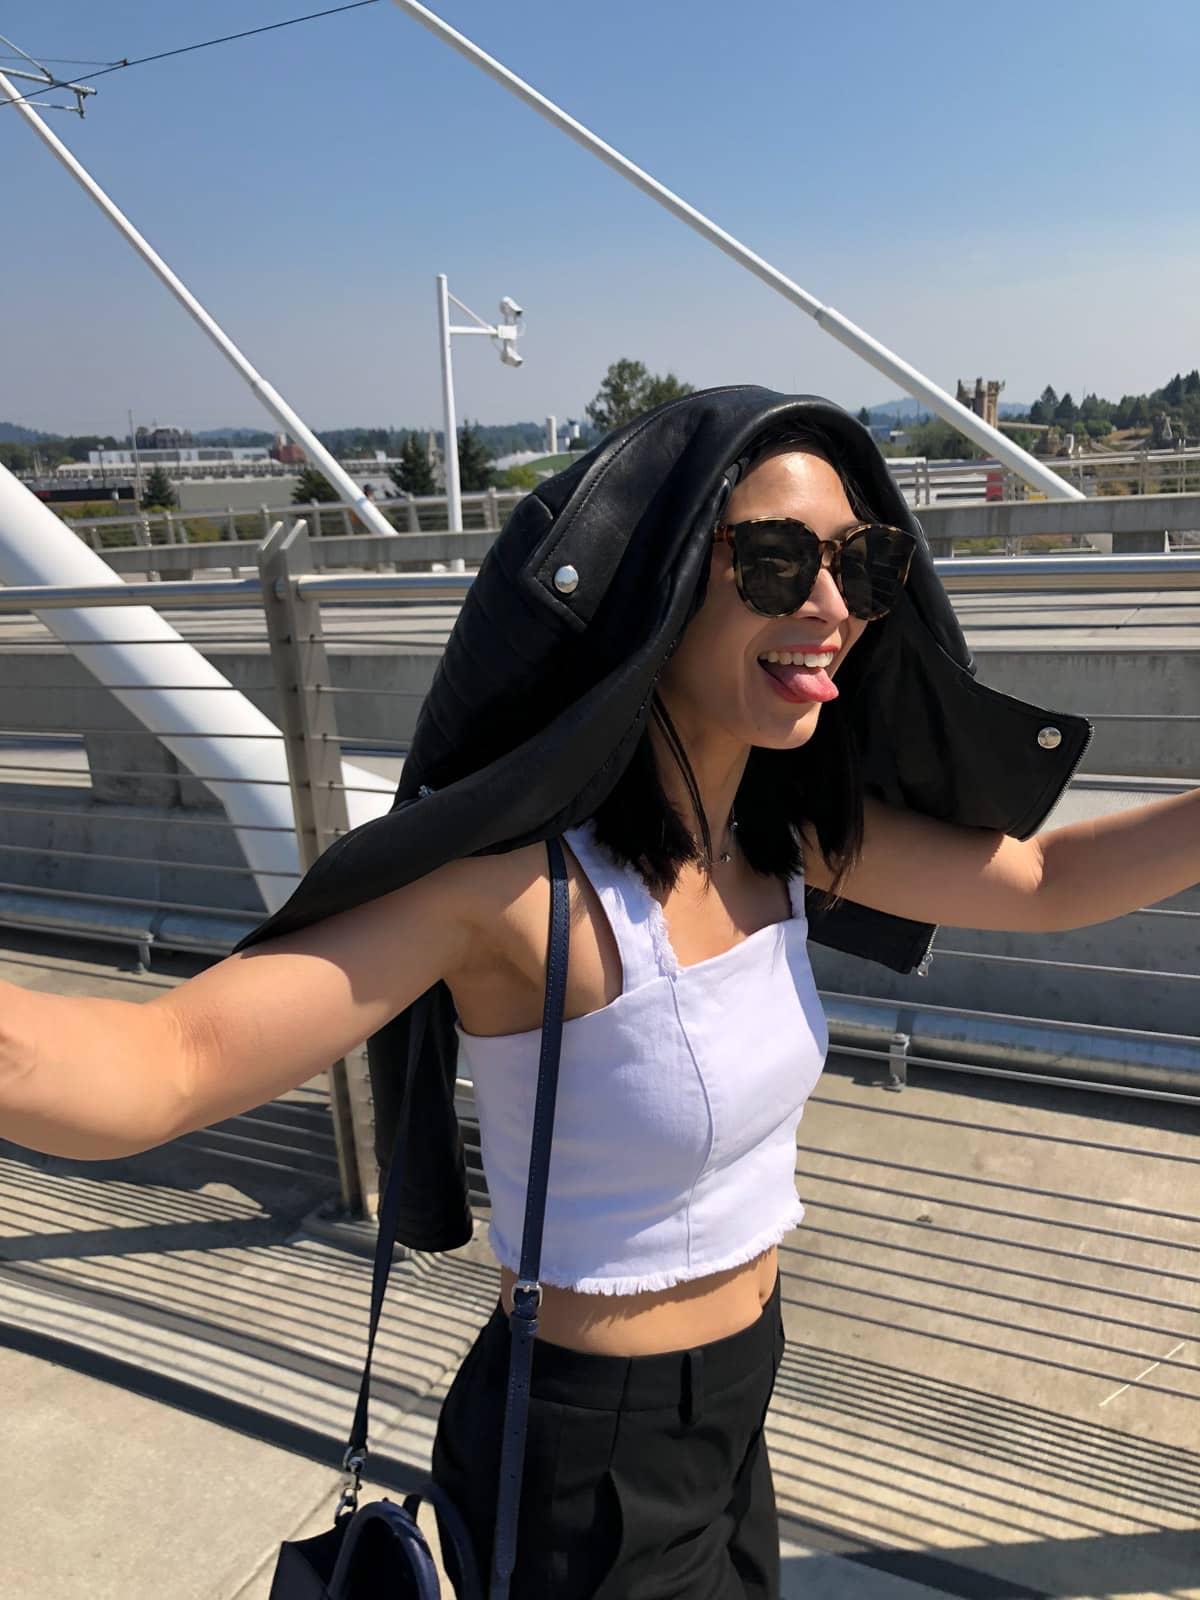 A woman in a white denim crop top and black pants, with big and round dark sunglasses and a leather jacket on top of her head like a cape. She is walking on what appears to be a bridge and is making a face with her tongue slightly stuck out.